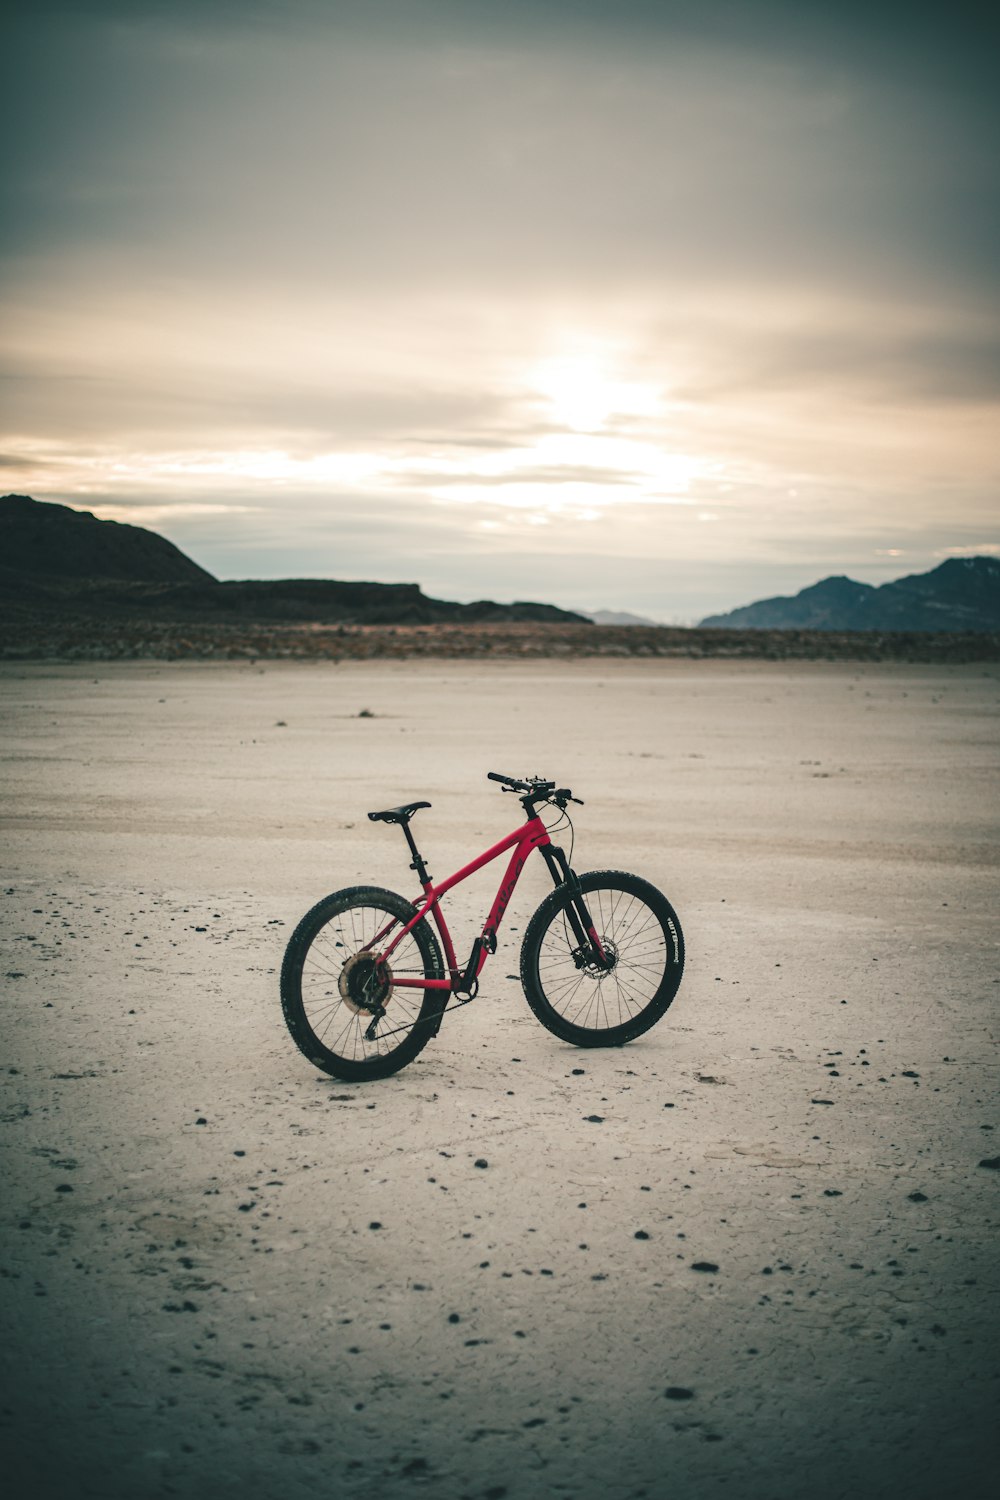 black and red mountain bike on beach shore during daytime